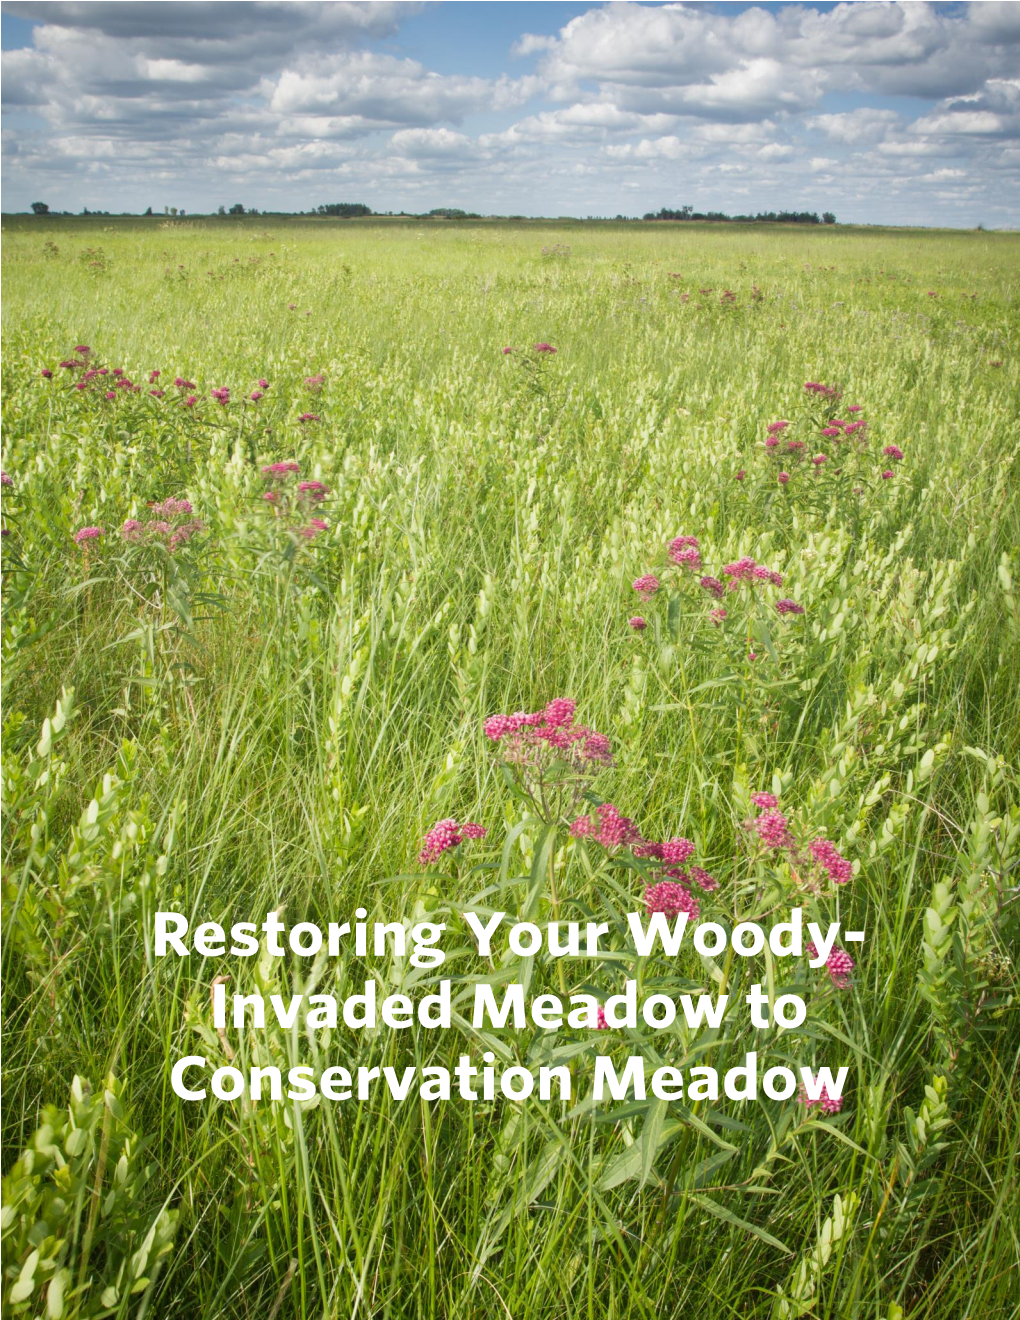 Woody-Invaded Meadow to Conservation Meadow